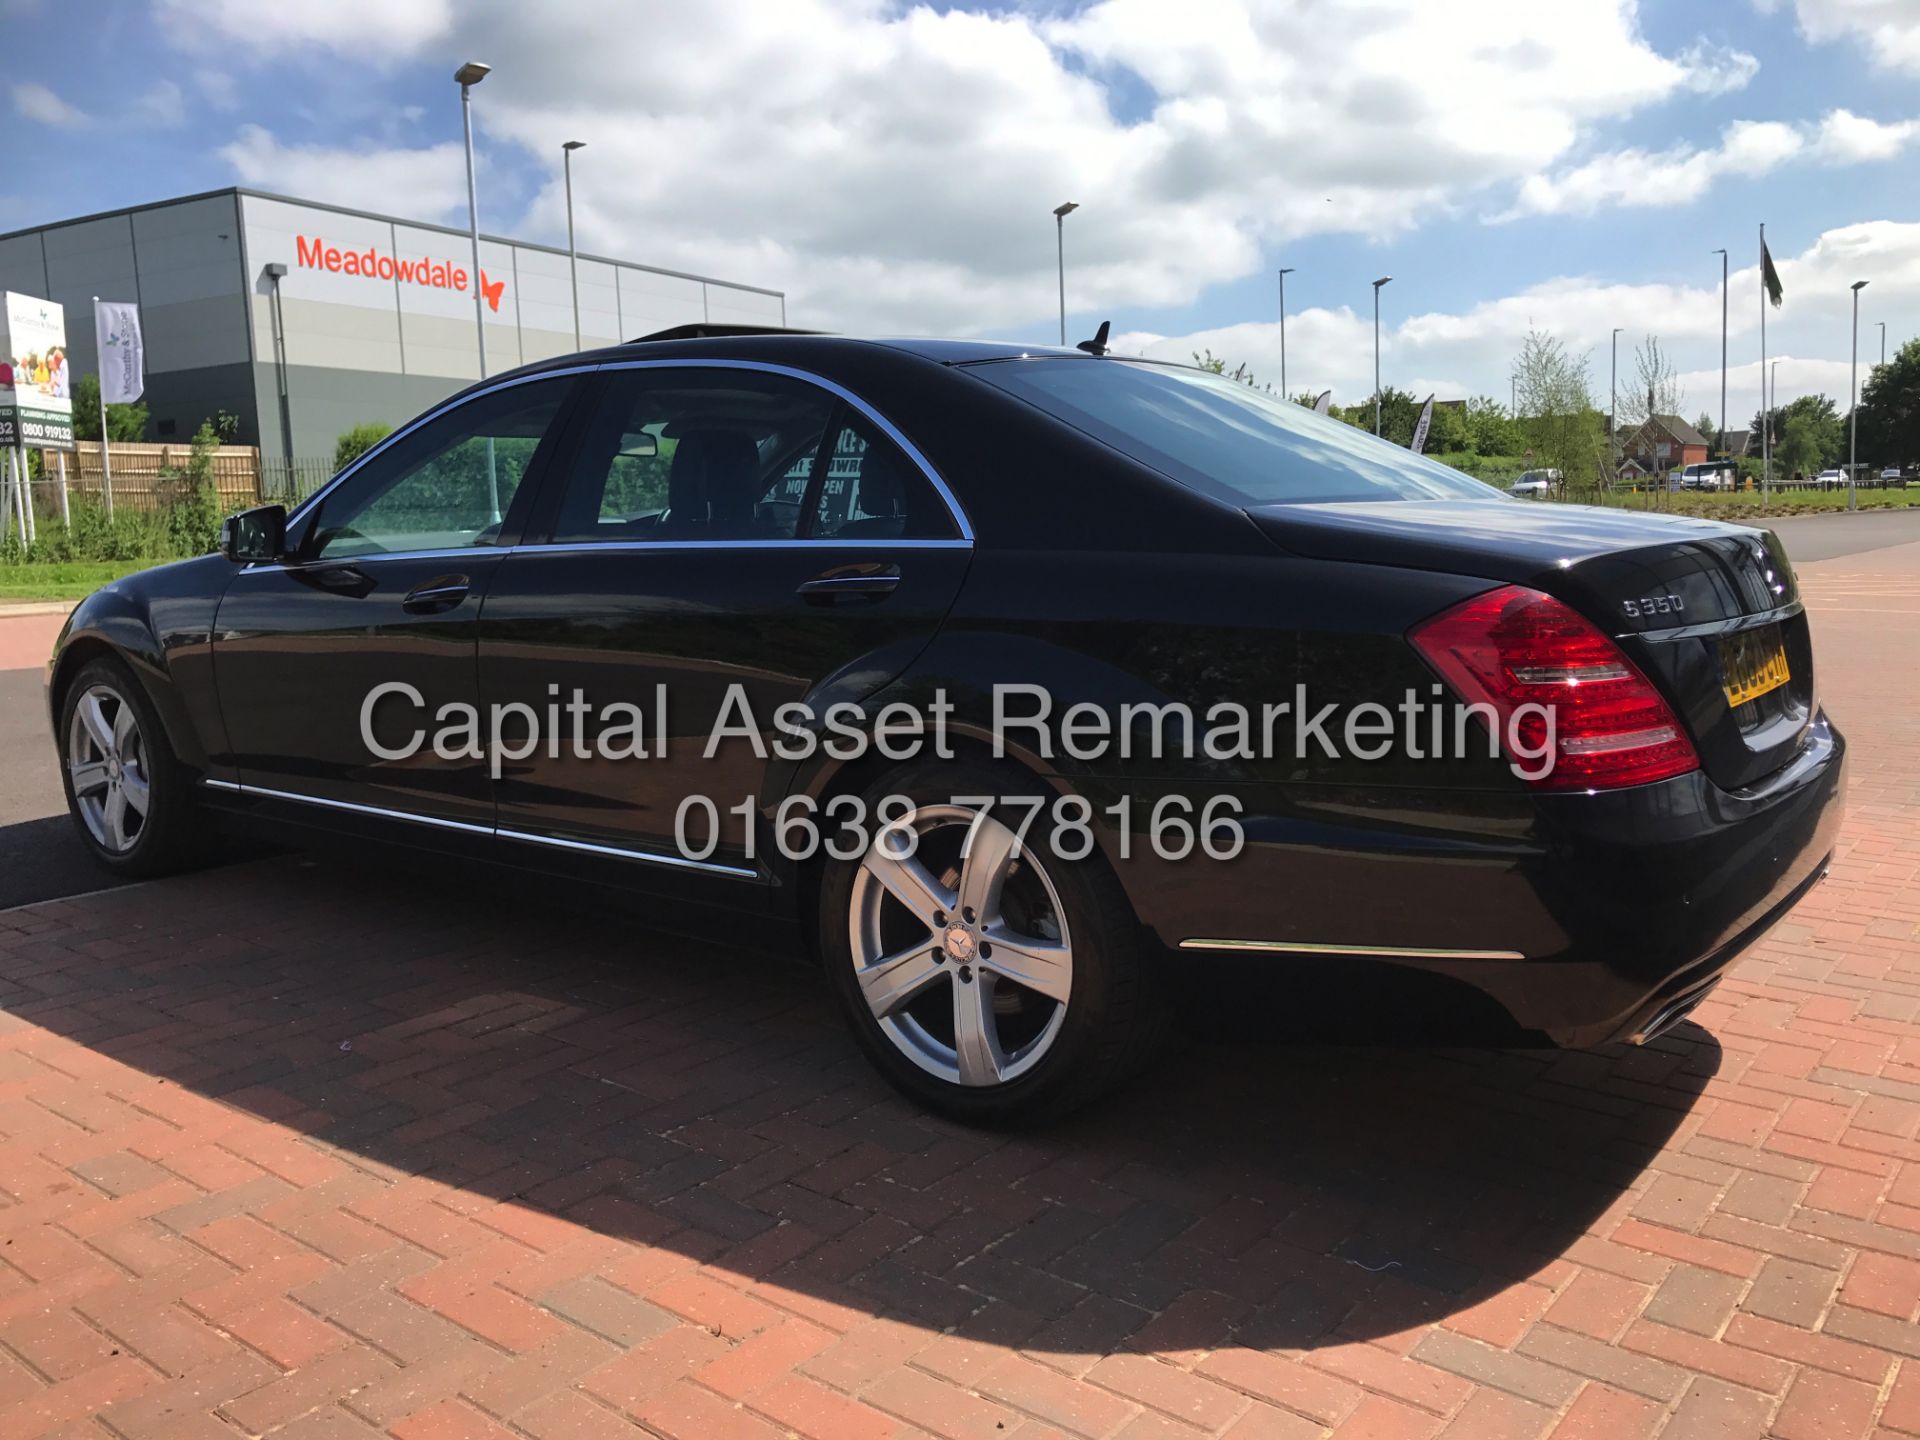 (ON SALE) MERCEDES S350CDI (2014 MODEL) LWB LIMO - SAT NAV - GLASS ROOF **ABSOLUTLY LOADED** - Image 7 of 37